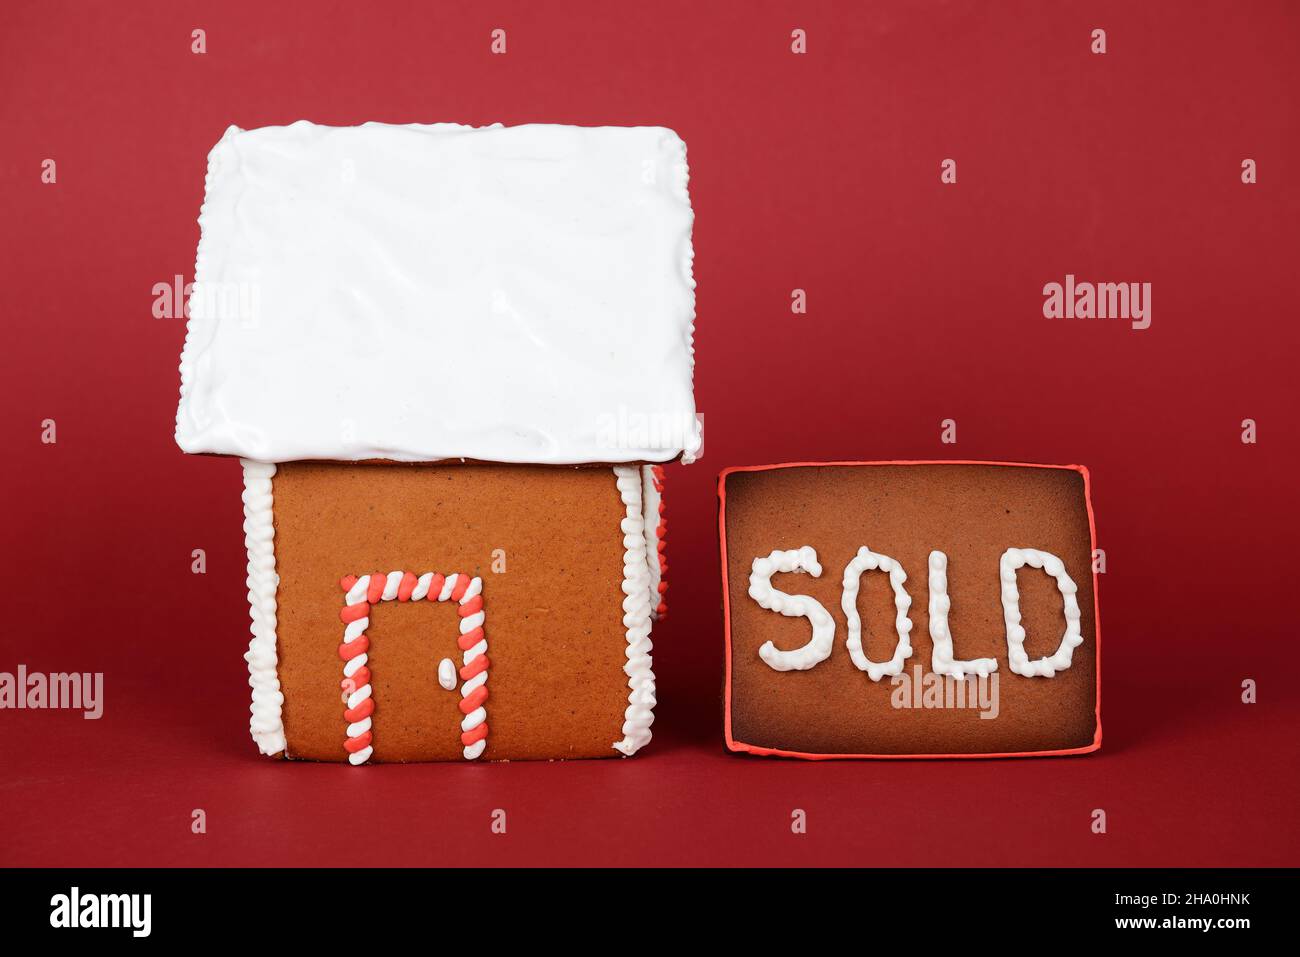 The hand-made eatable gingerbread house on red background Stock Photo